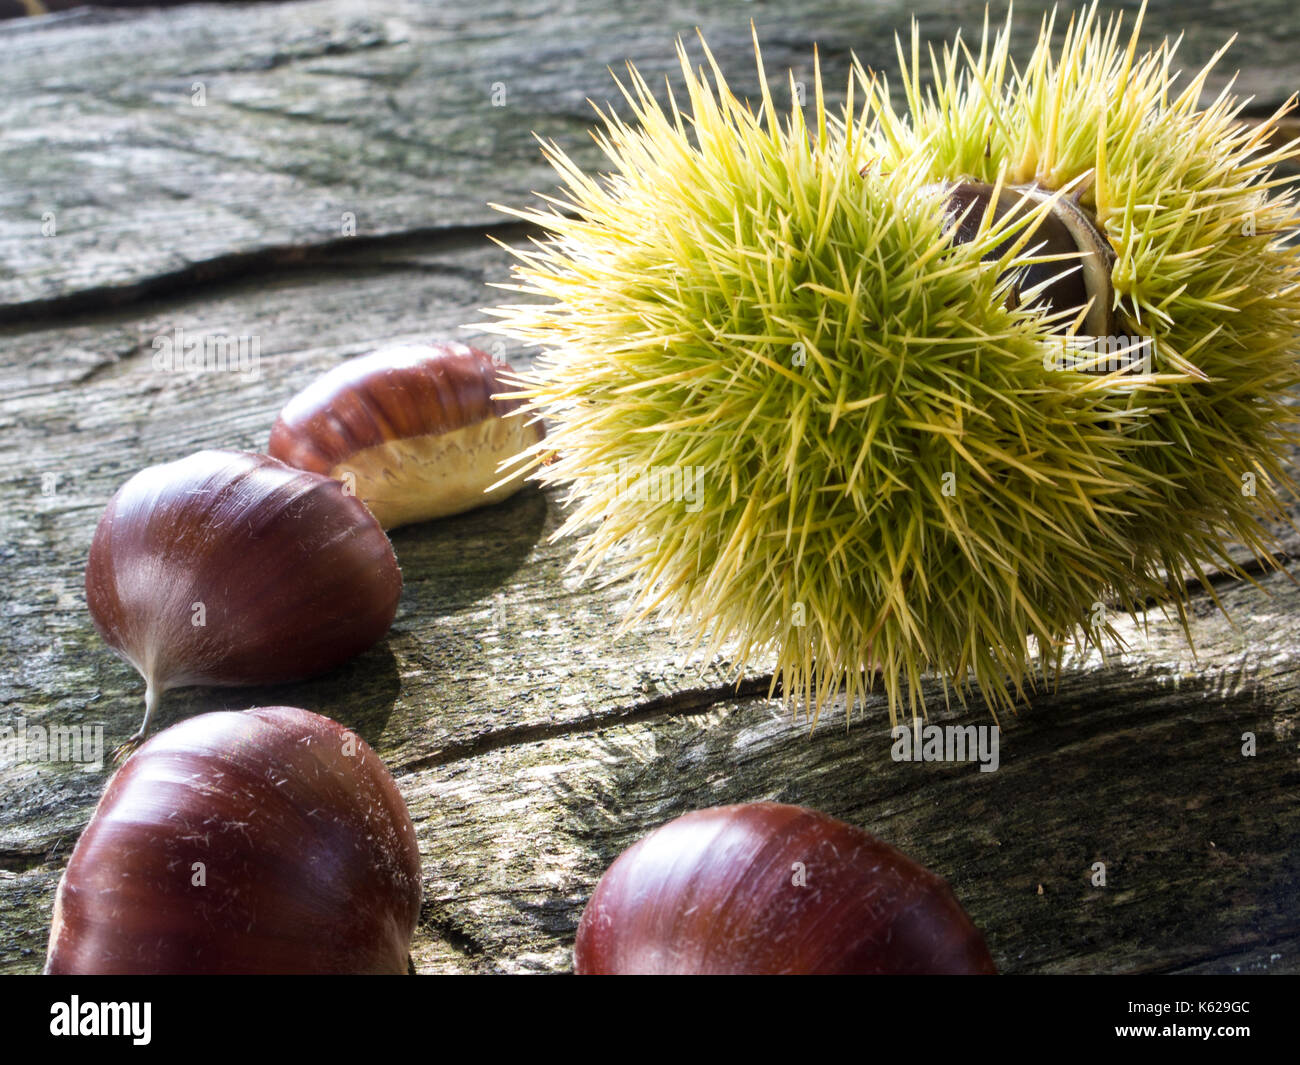 Chestnuts and burr on a wooden surface with bright autumn colors Stock Photo